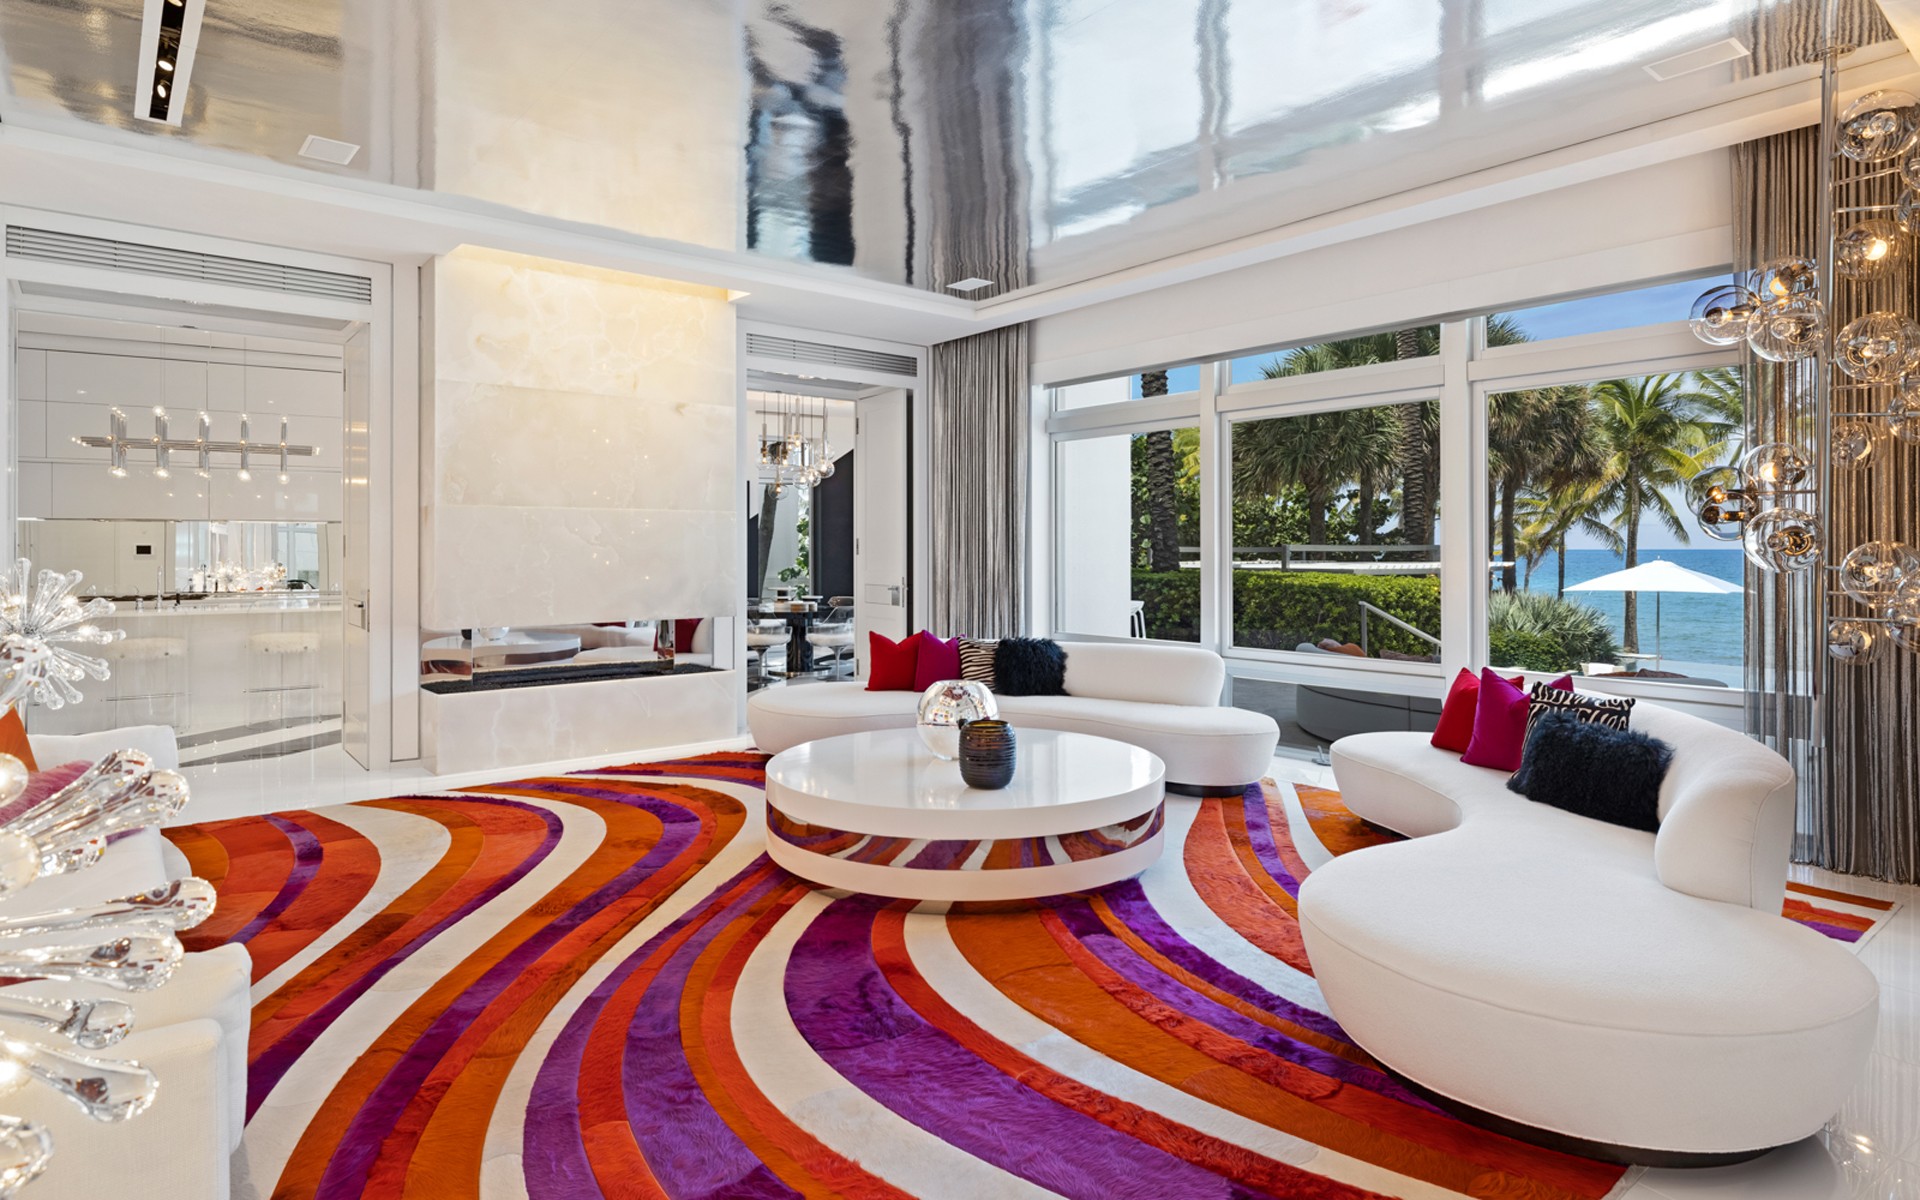 Tommy Hilfiger's Vibrant Miami Mansion Hits the Market for $24.5 Million